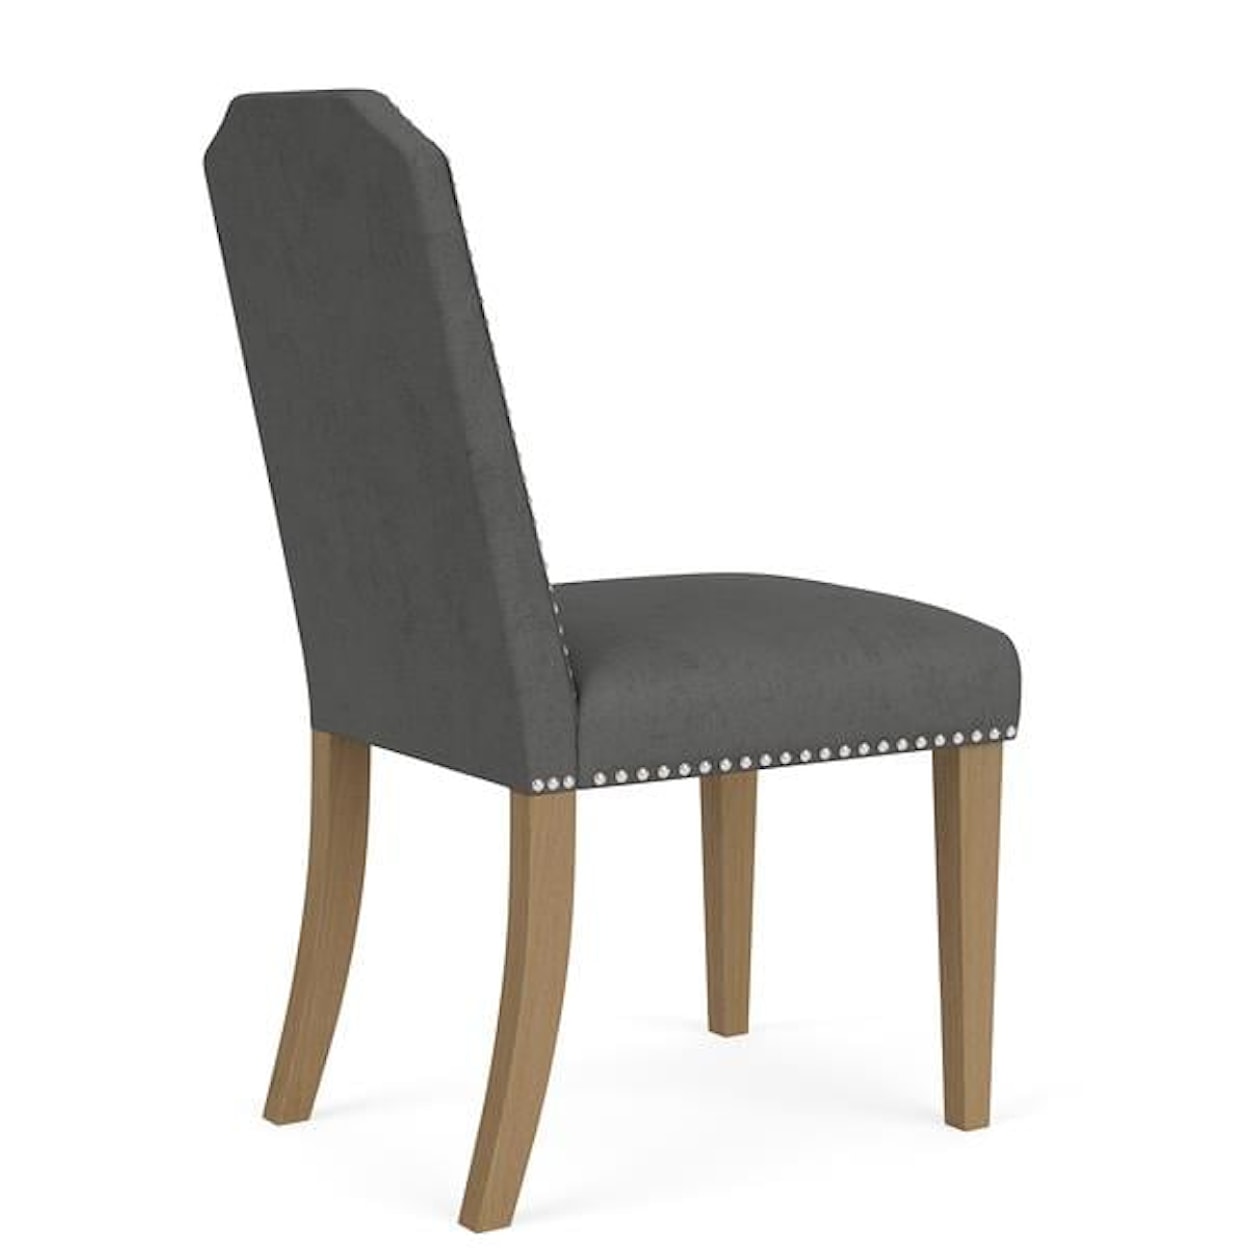 Riverside Furniture Mix-N-Match Chairs Upholstered Side Chair